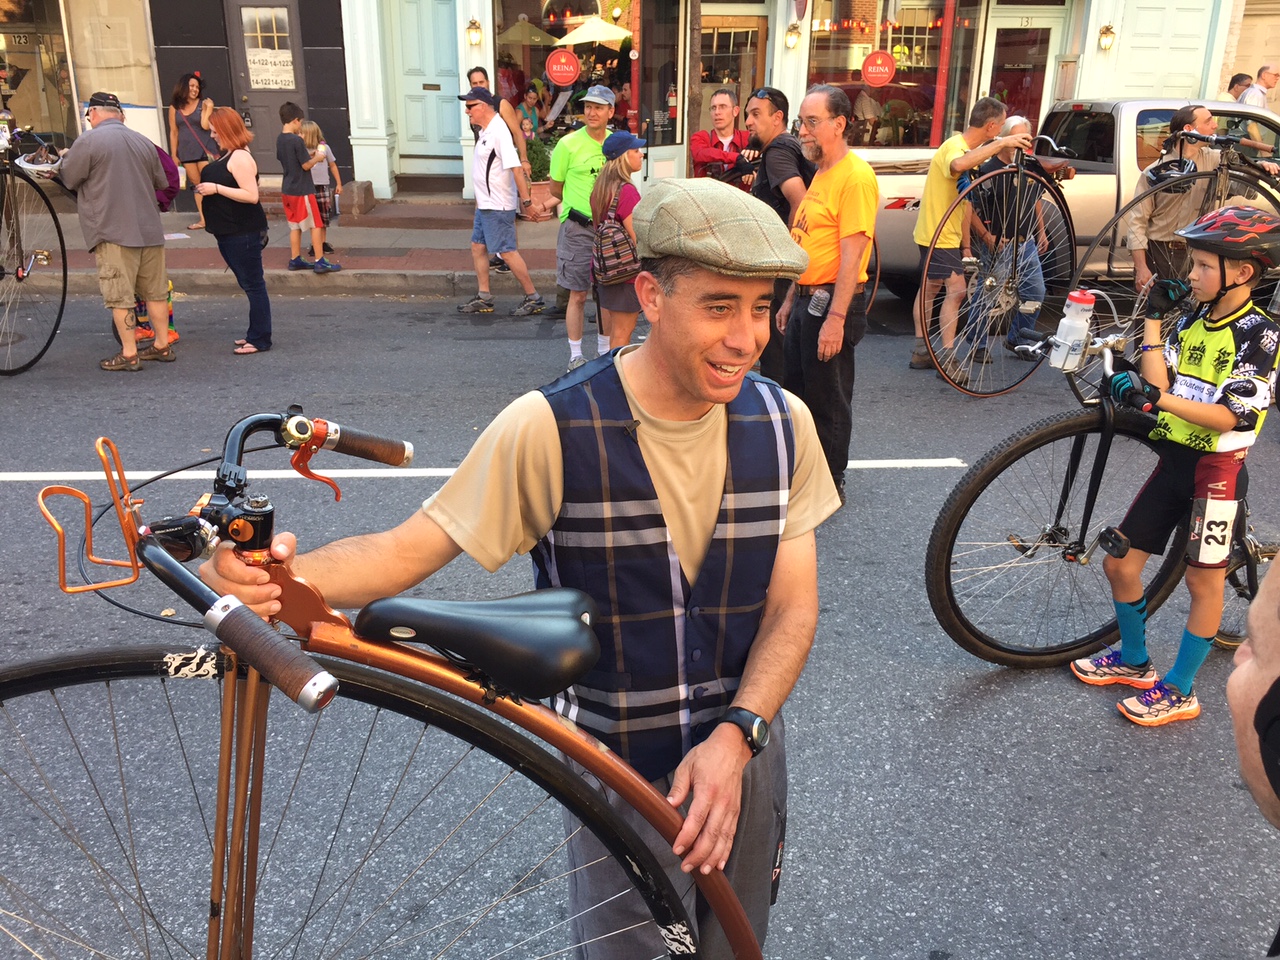 One rider shows off his vintage-style bike. (WTOP/Kate Ryan)